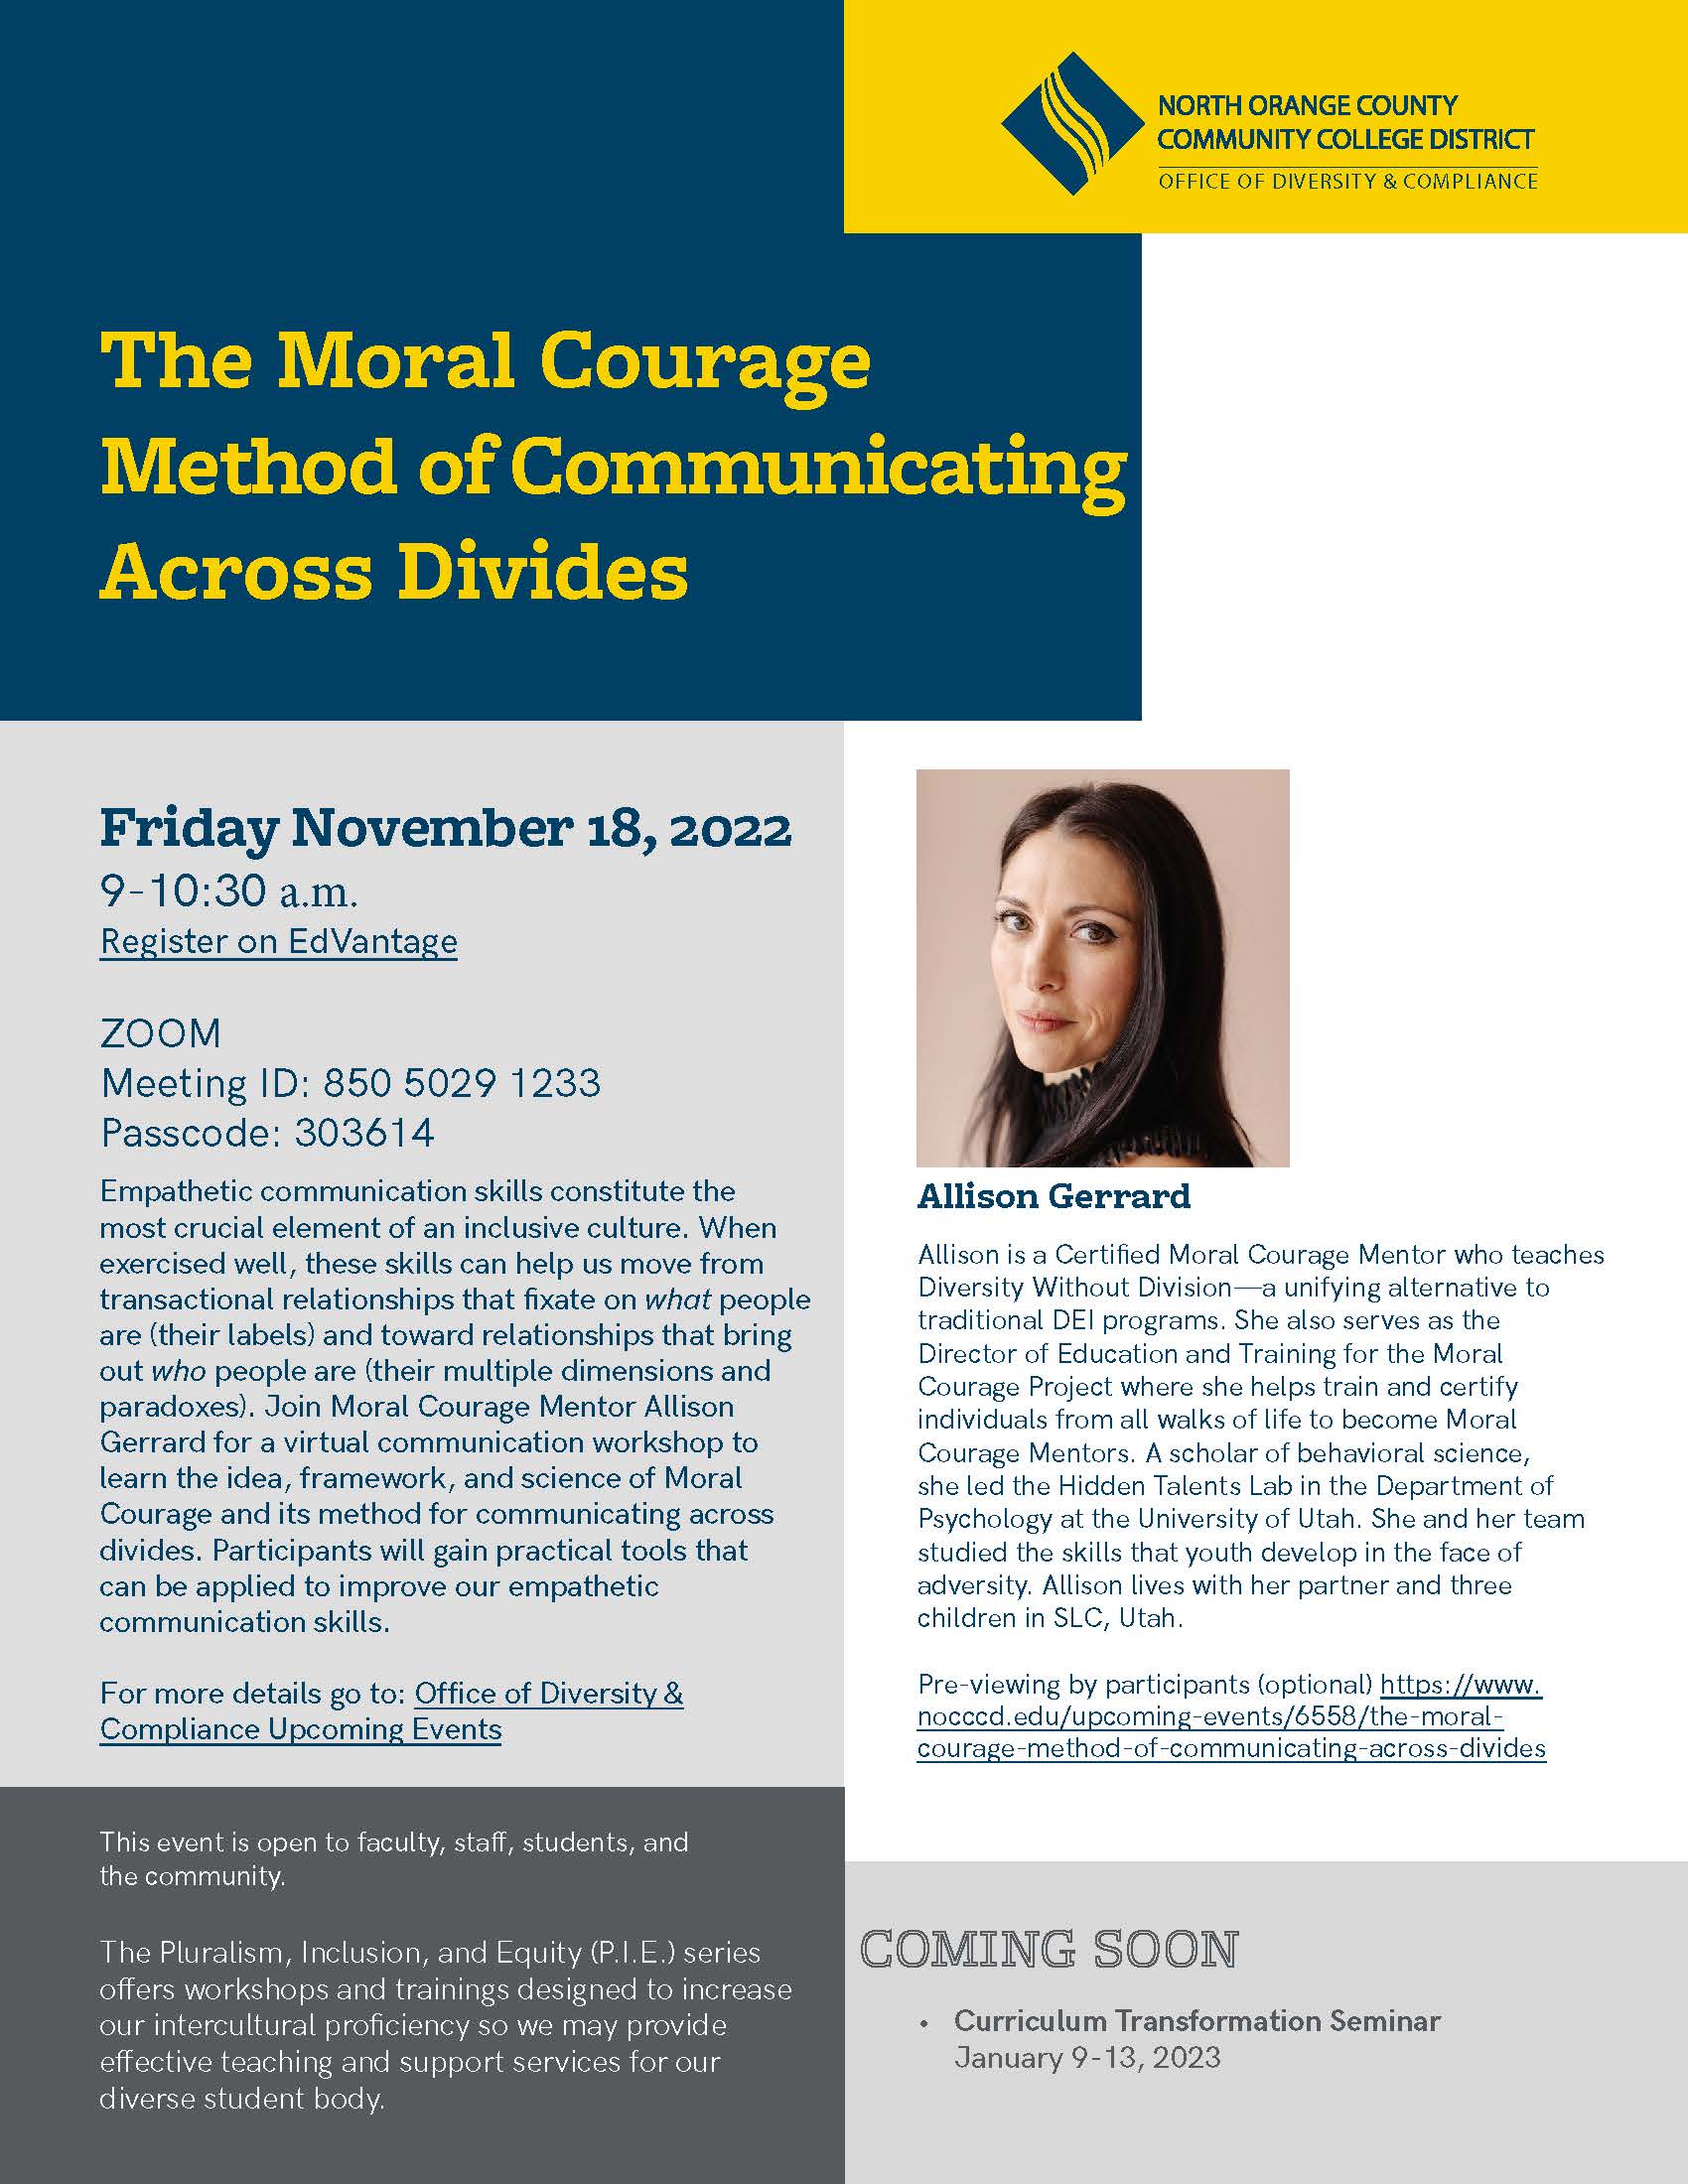 The Moral Courage Method of Communicating Across Divides - Cypress College